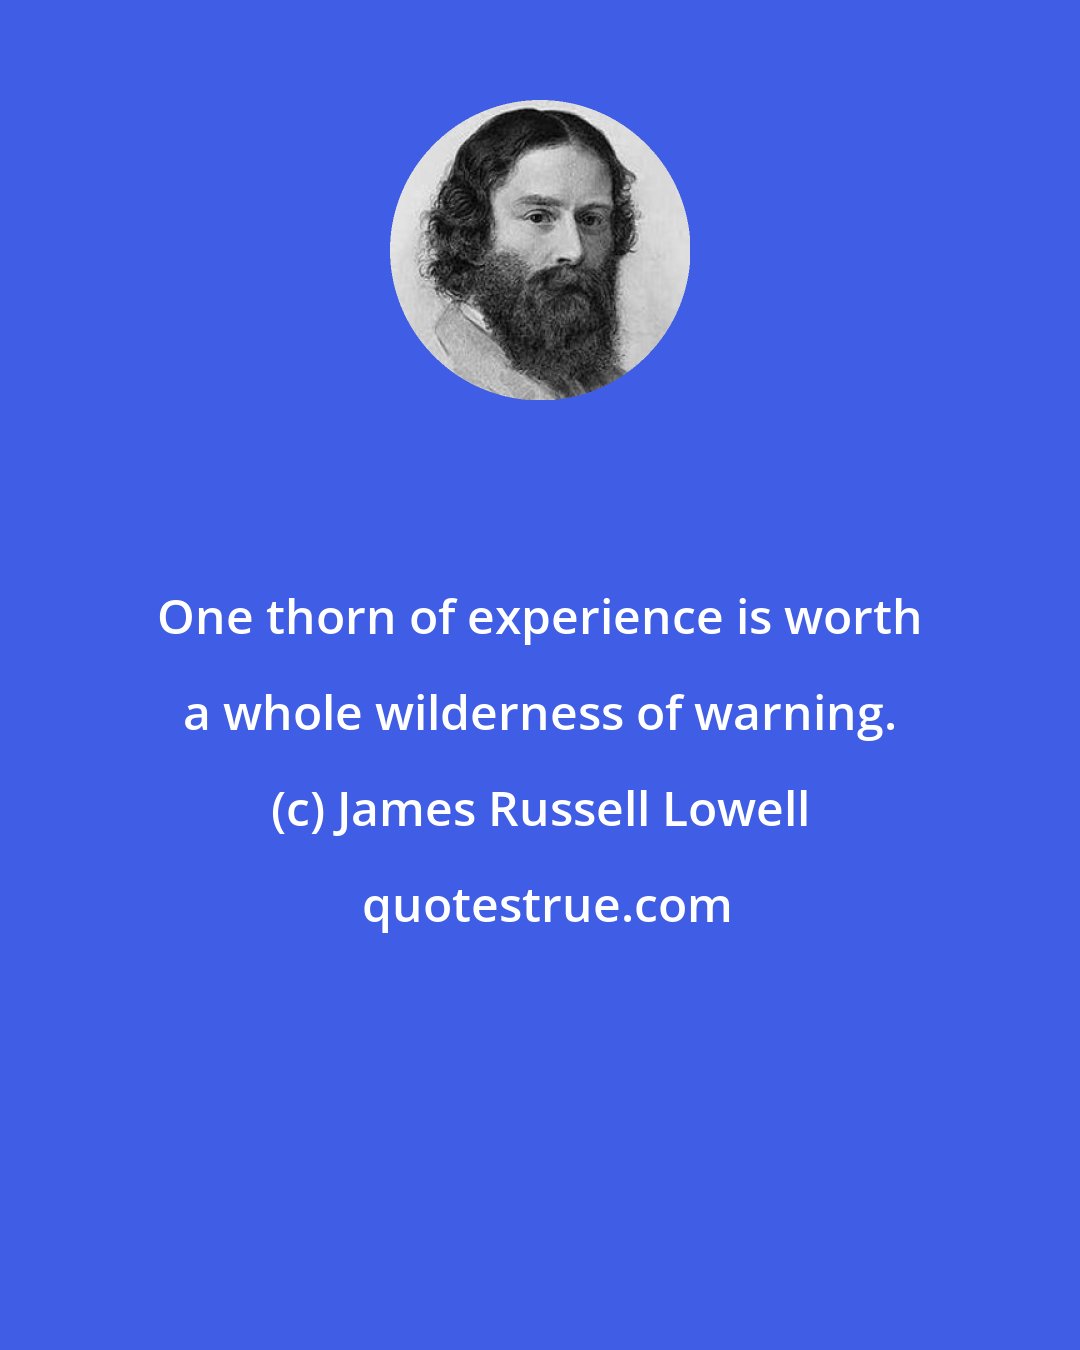 James Russell Lowell: One thorn of experience is worth a whole wilderness of warning.